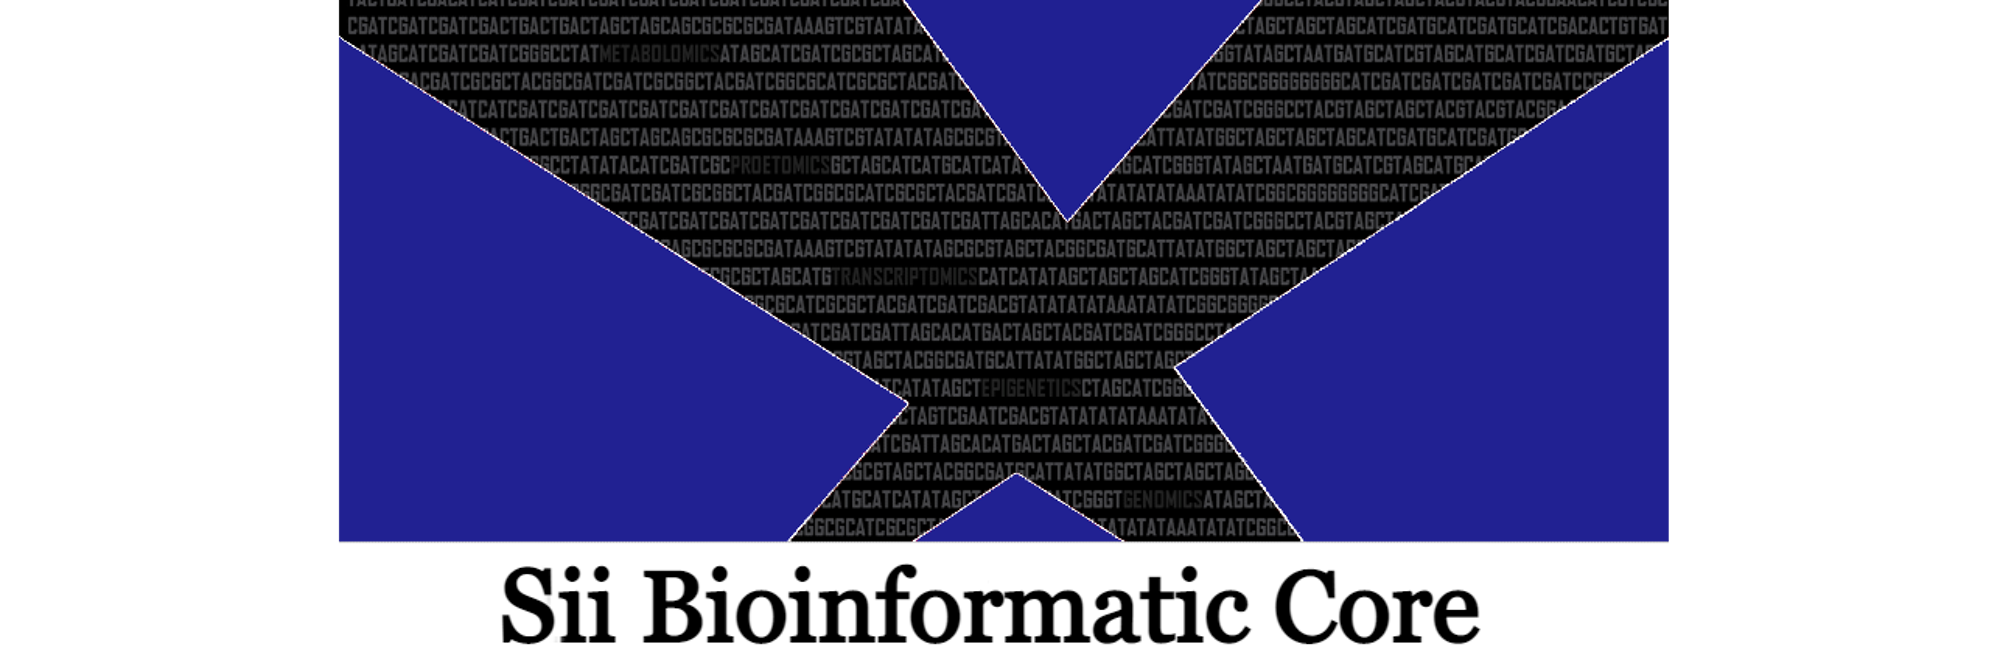 A graphic with code embedded within two crossing beams against a blue background with Sii Bioinformatic Core in text underneath